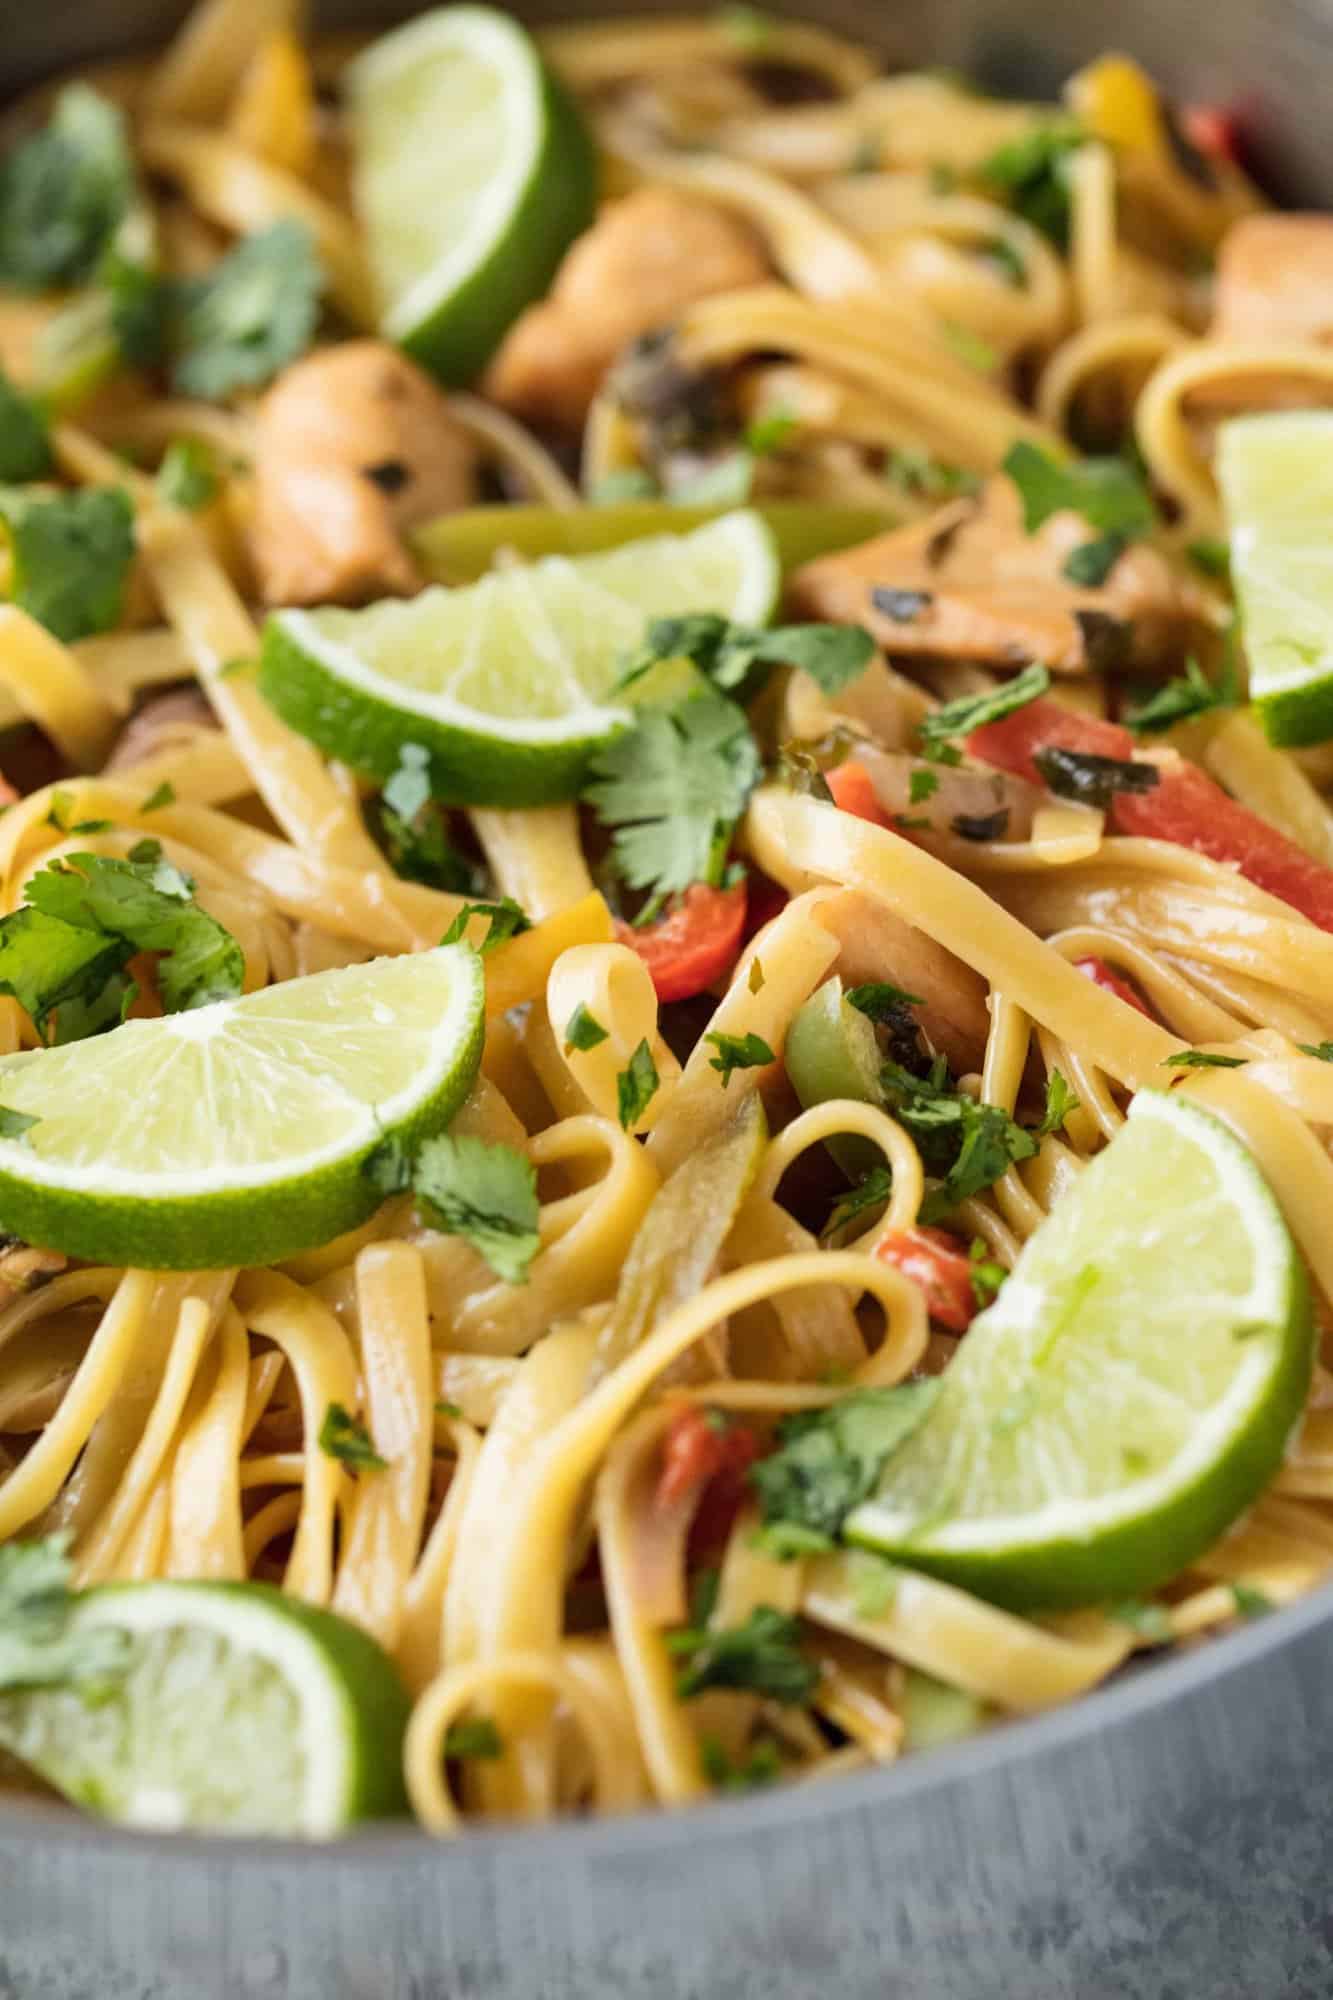 Tequila Lime Chicken Pasta is fun, vibrant, and full of flavor. This easy weeknight dinner is a complete meal with meat, veggies, and pasta all in one amazing dish. And the tequila burns off so it's family friendly too!